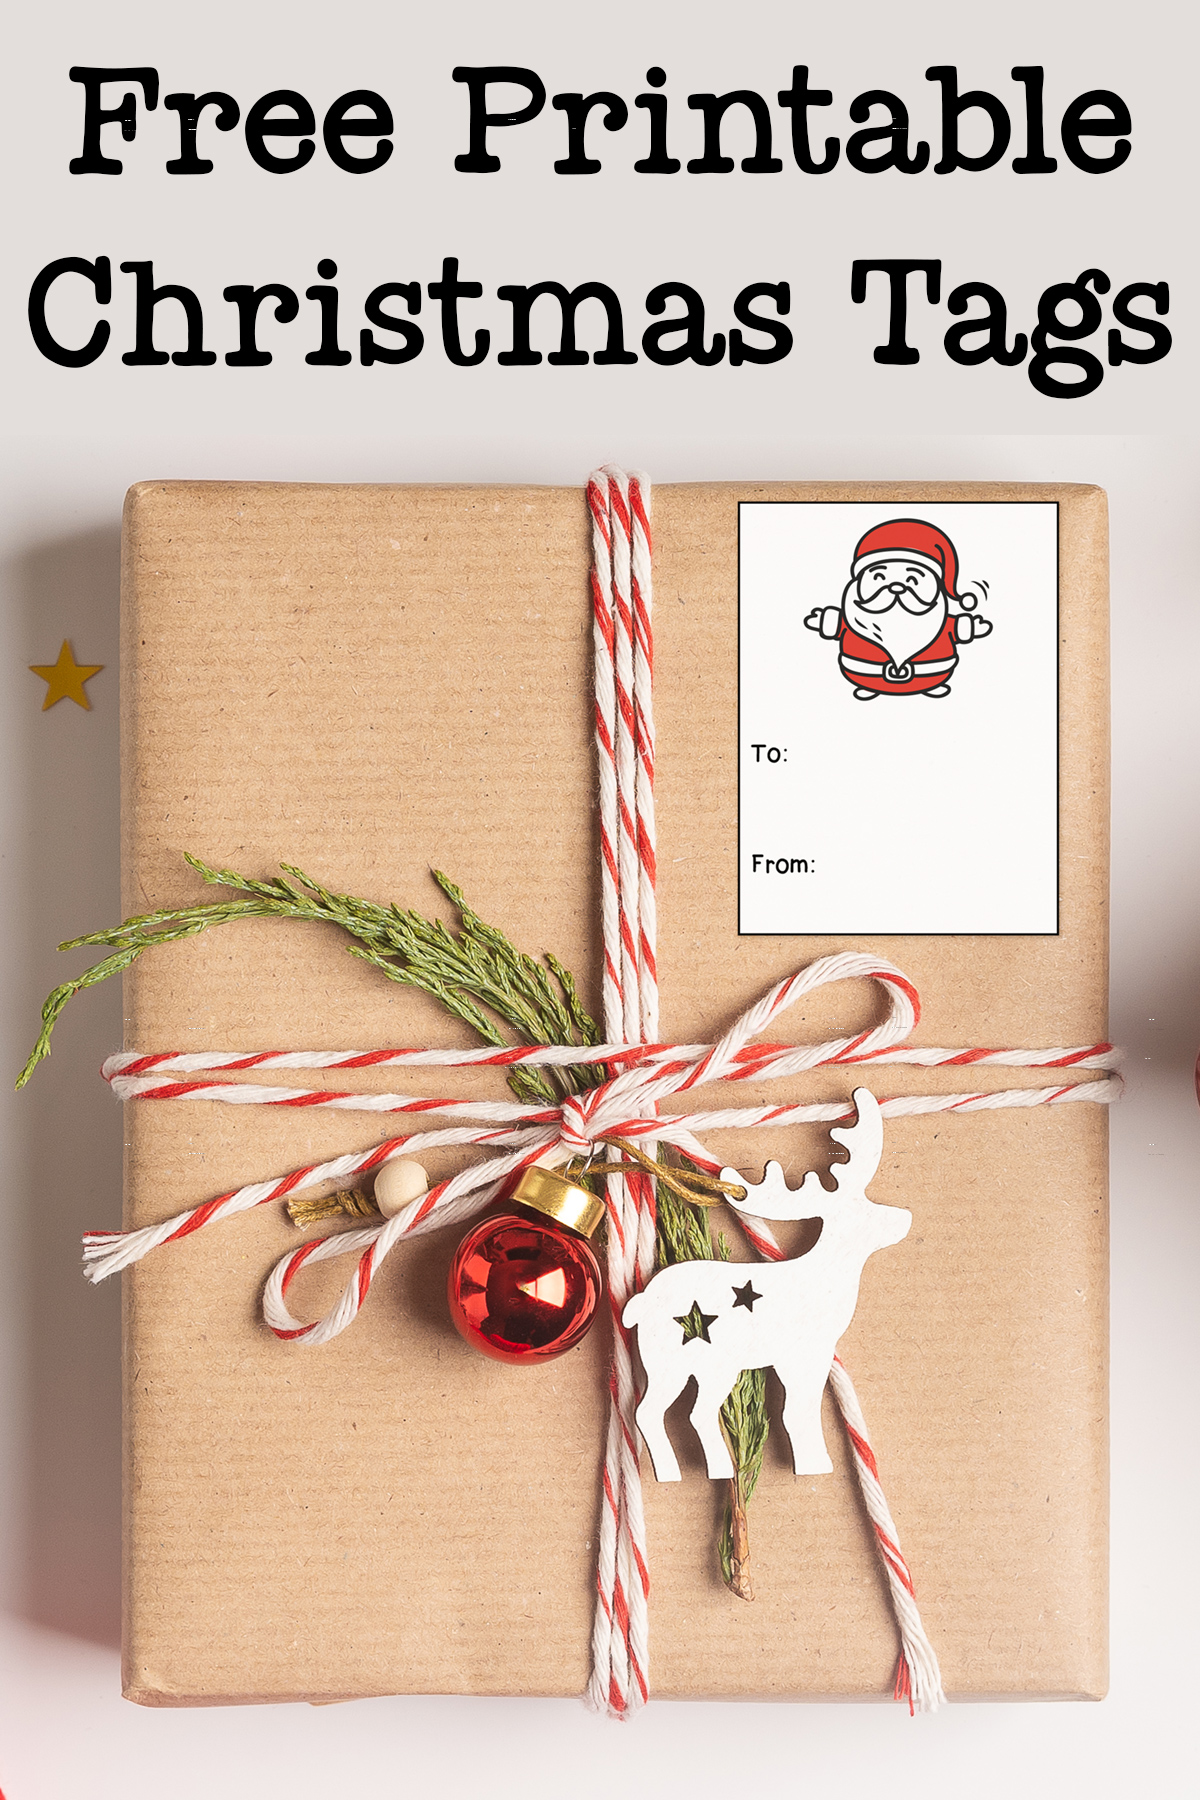 At then top it says free printable Christmas tags. Below that, the image shows 1 of the 18 free gift tags you can get for free as part of the printable Christmas labels for gifts set.